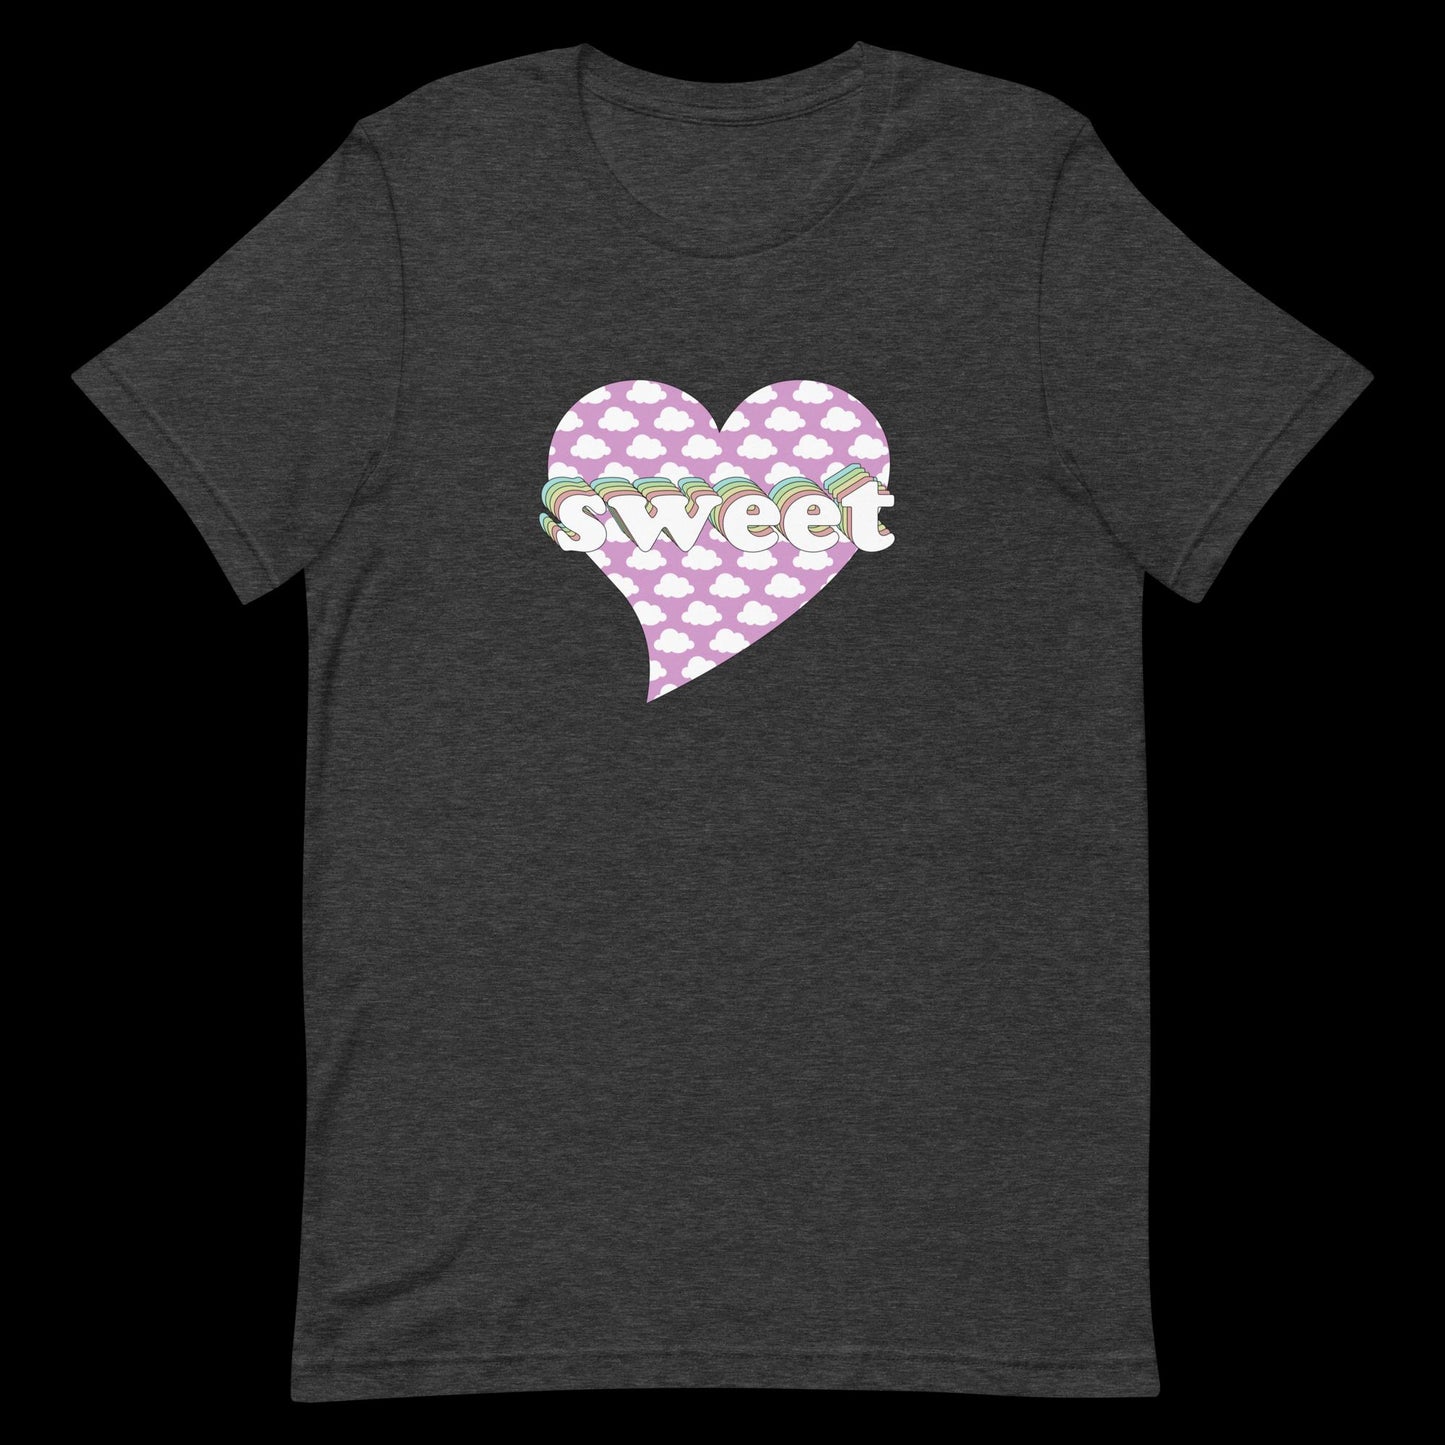 Sweet Heart with Clouds - Unisex T-Shirt